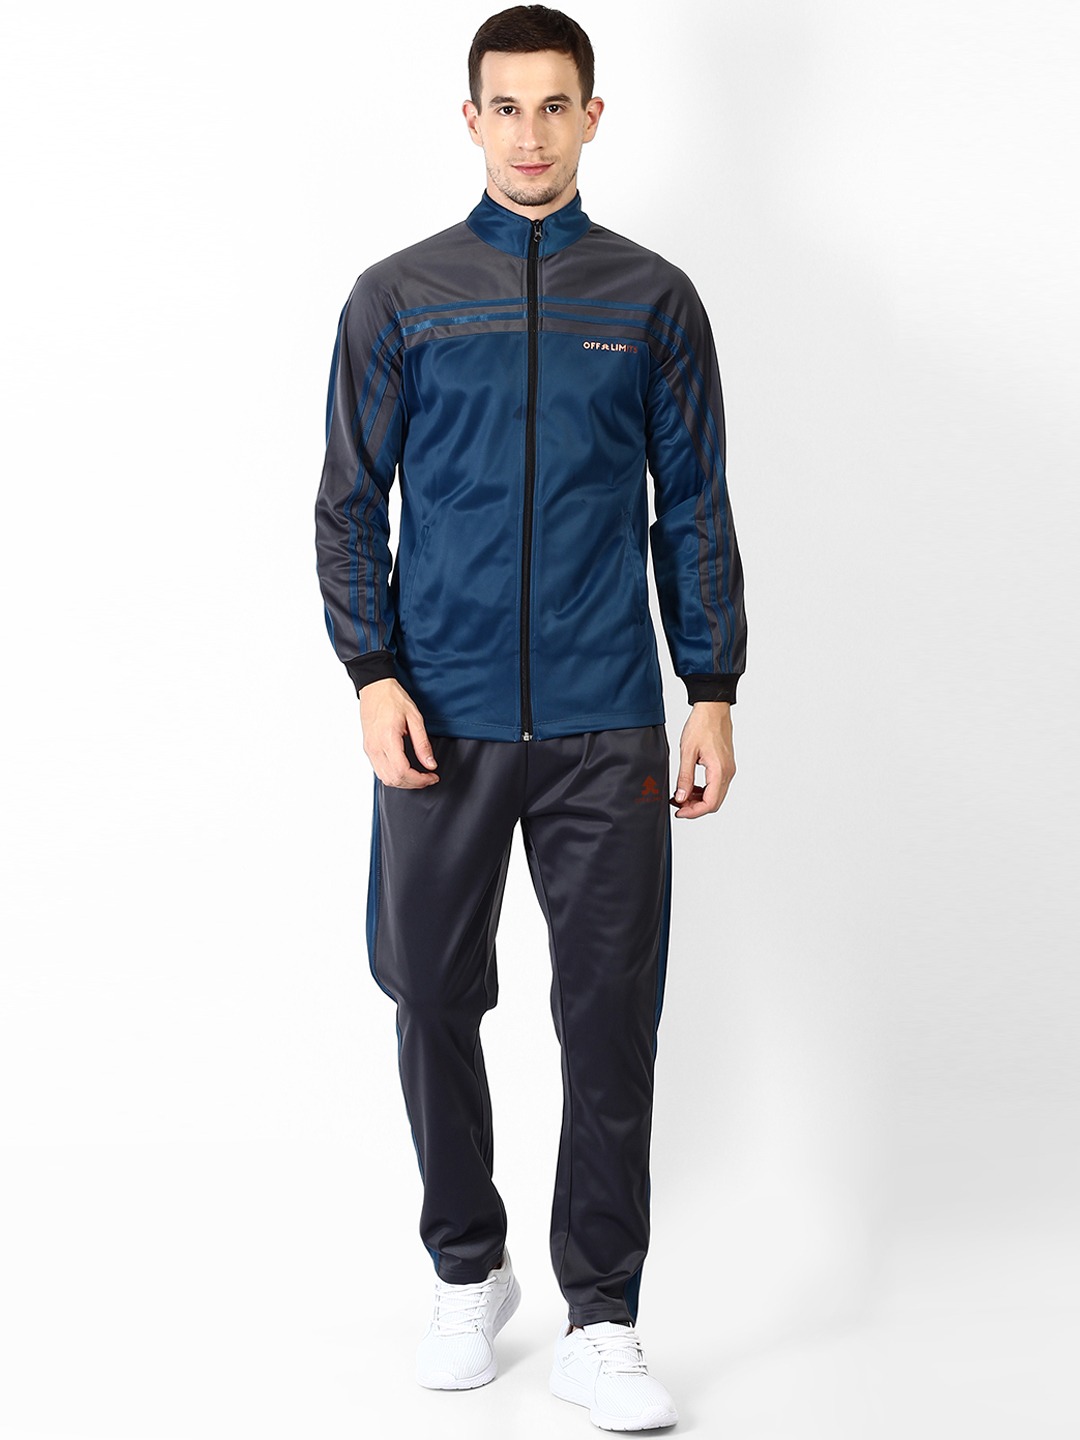 Clothing Tracksuits | OFF LIMITS Men Teal Blue Solid Tracksuit - AI39961